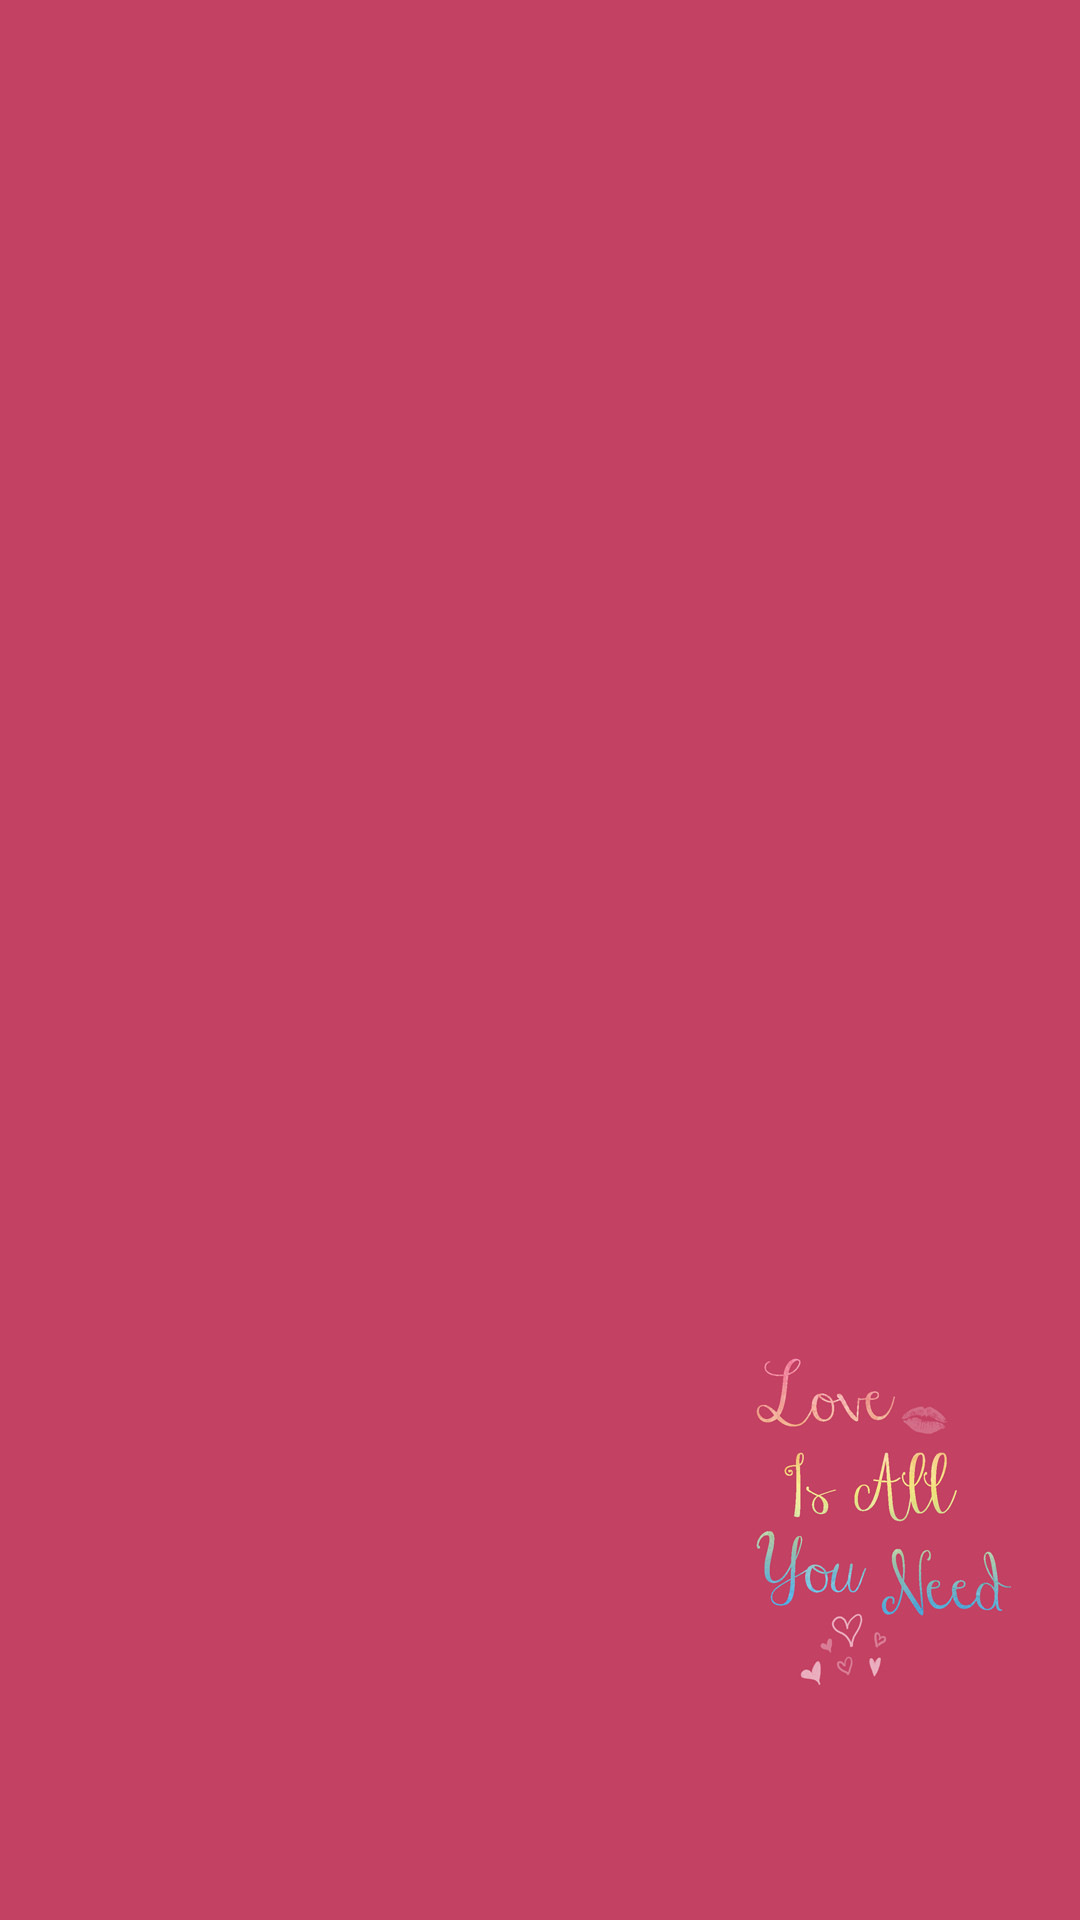 1080x1920 Quote Love Lips Rouge iPhone Wallpaper Pink Home Screen